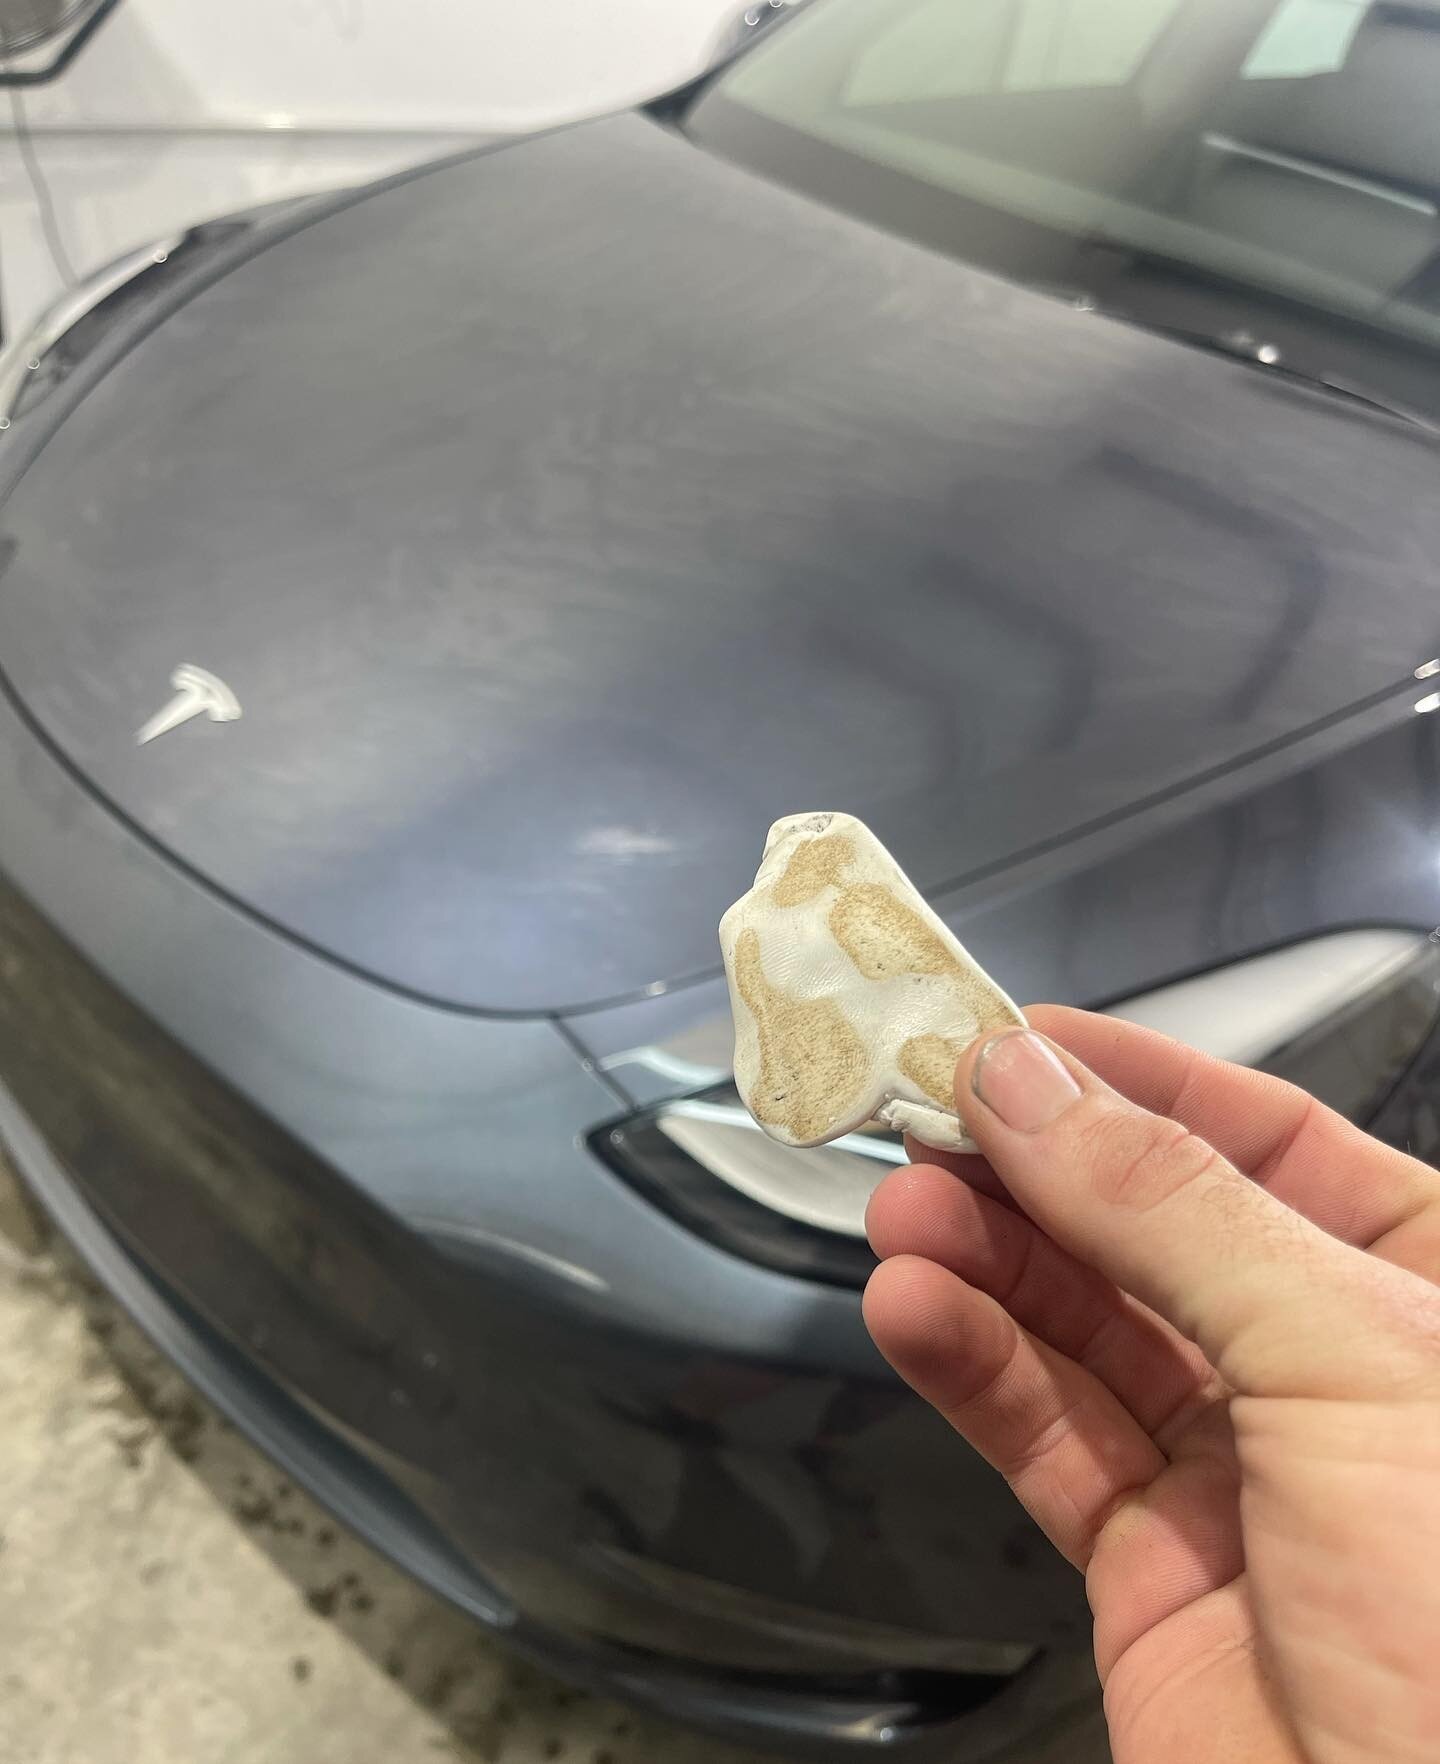 Brand new Tesla coming in for a correction and coating. 

This clay bar was white before starting the decontamination process on the hood! 

We always make sure the vehicle is completely decontaminated before we do any polishing and coating.